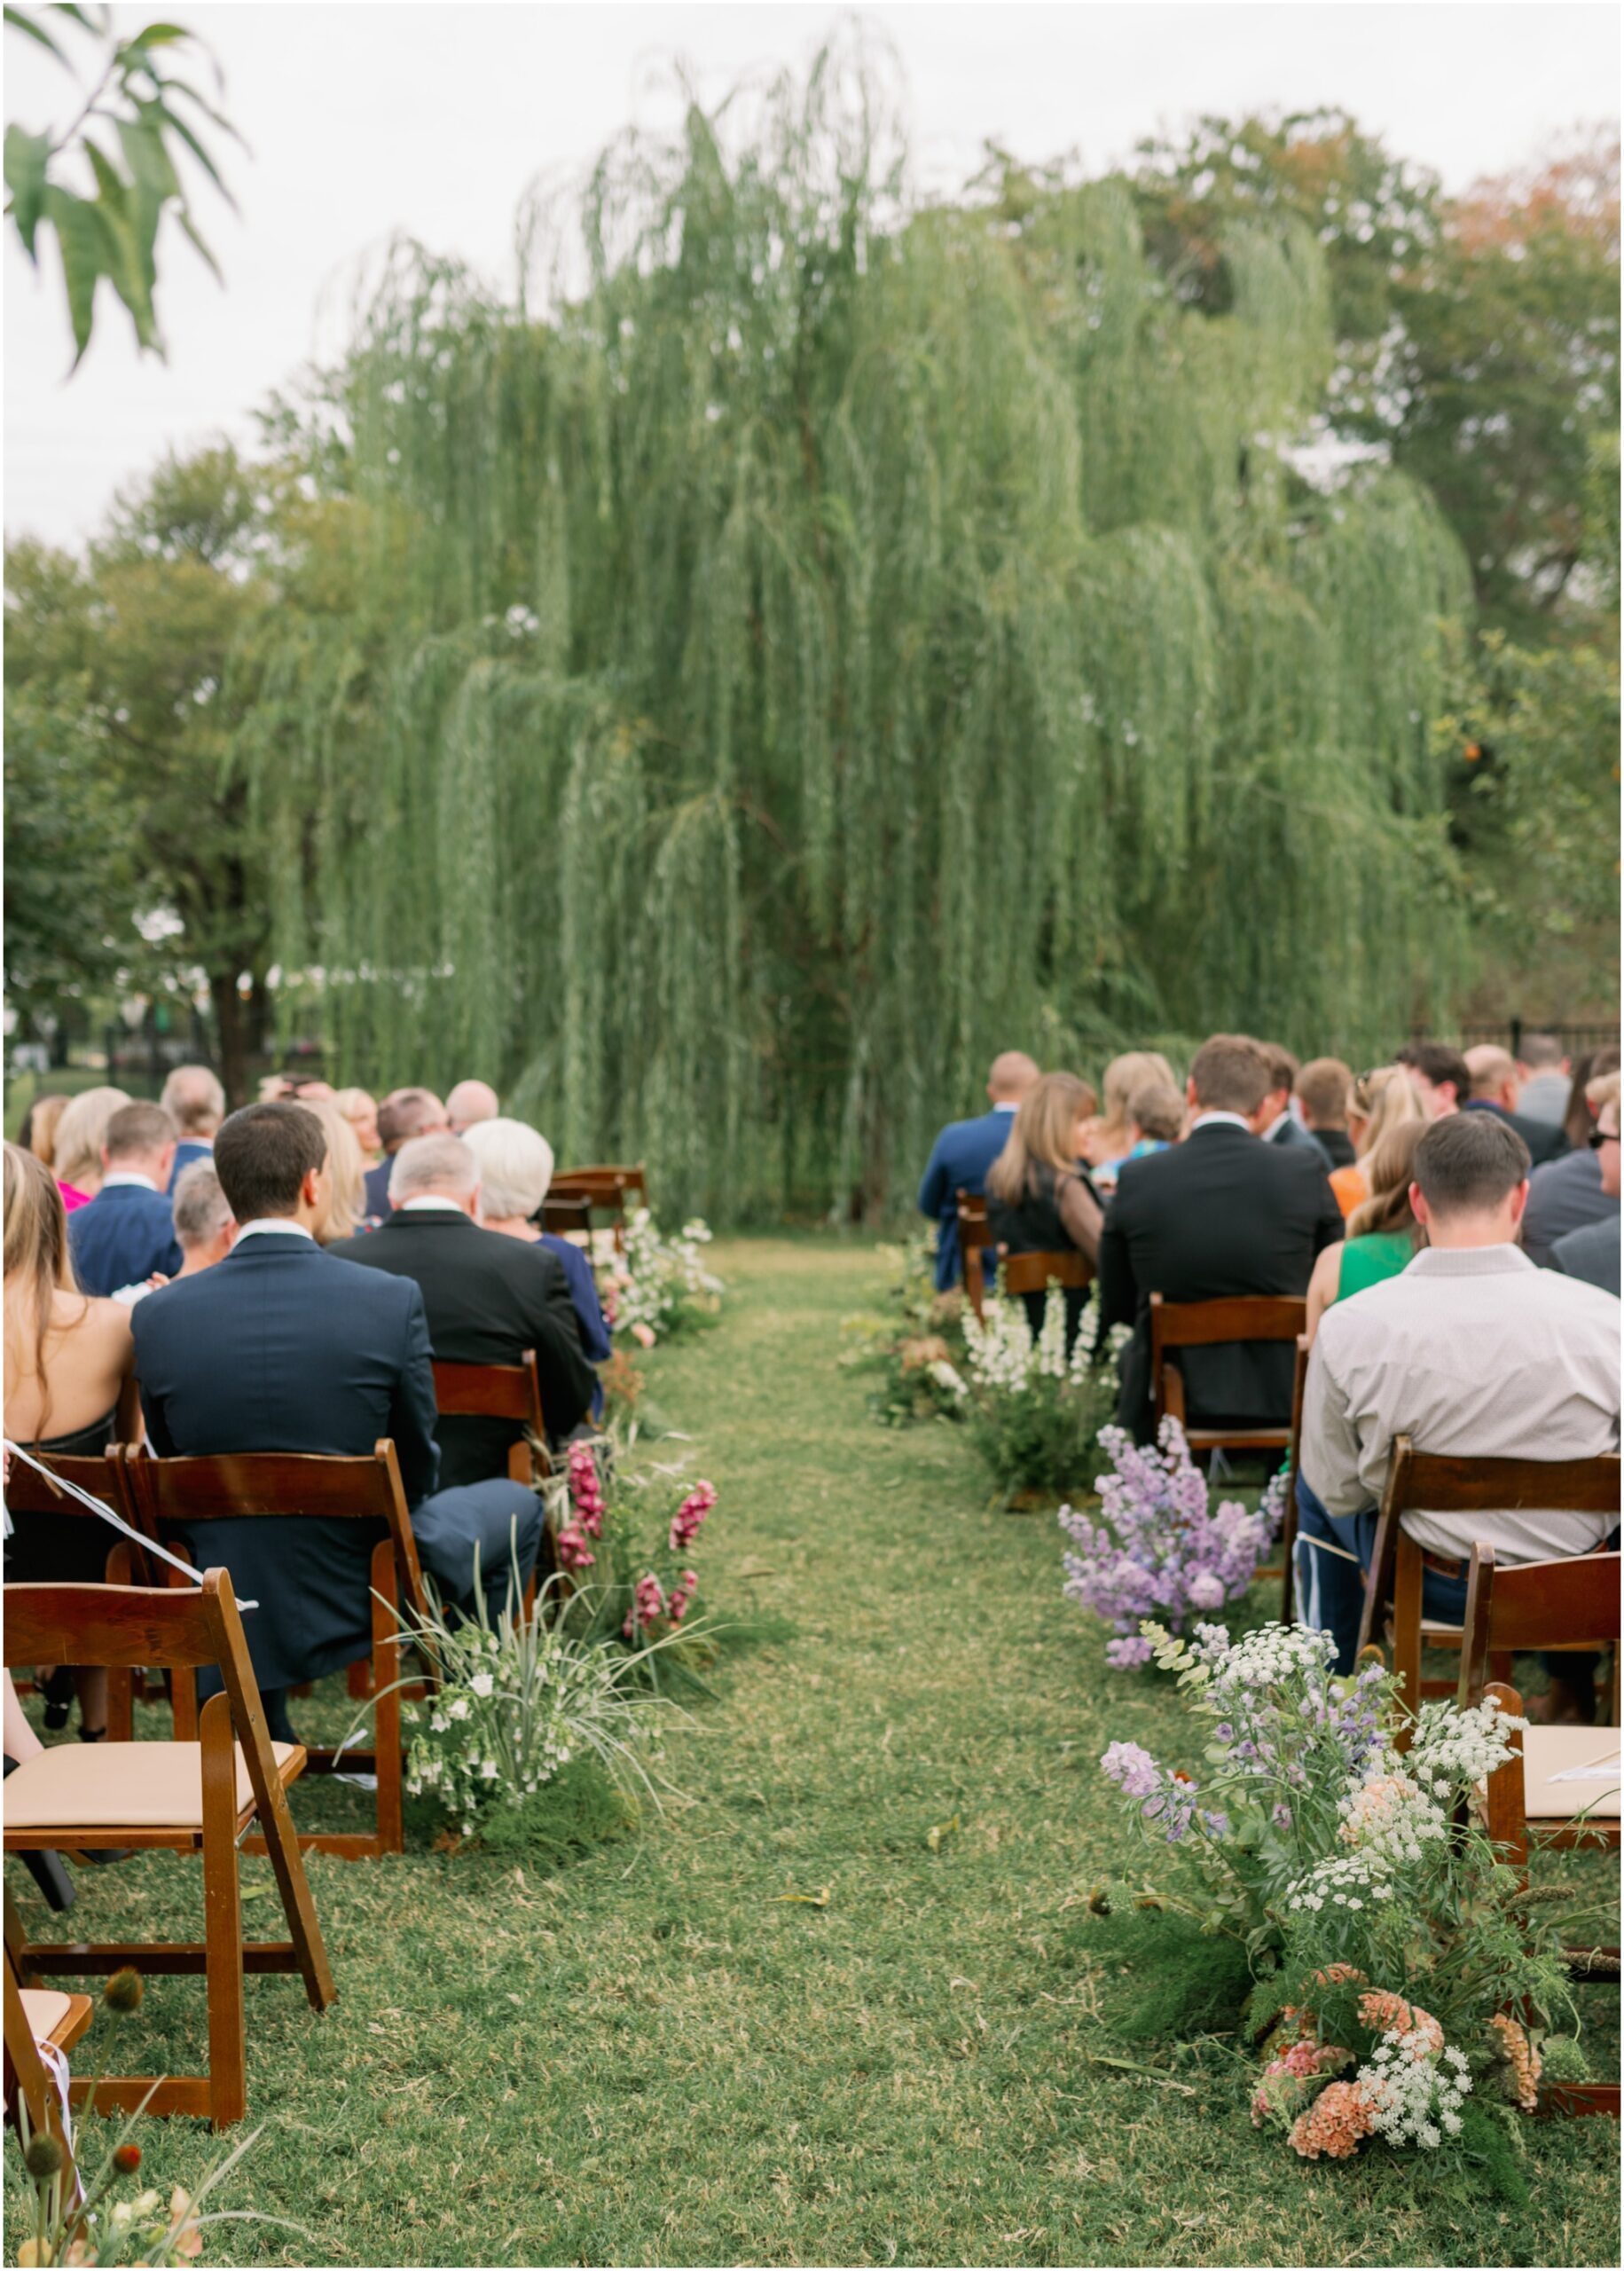 colorful florals at wedding ceremony